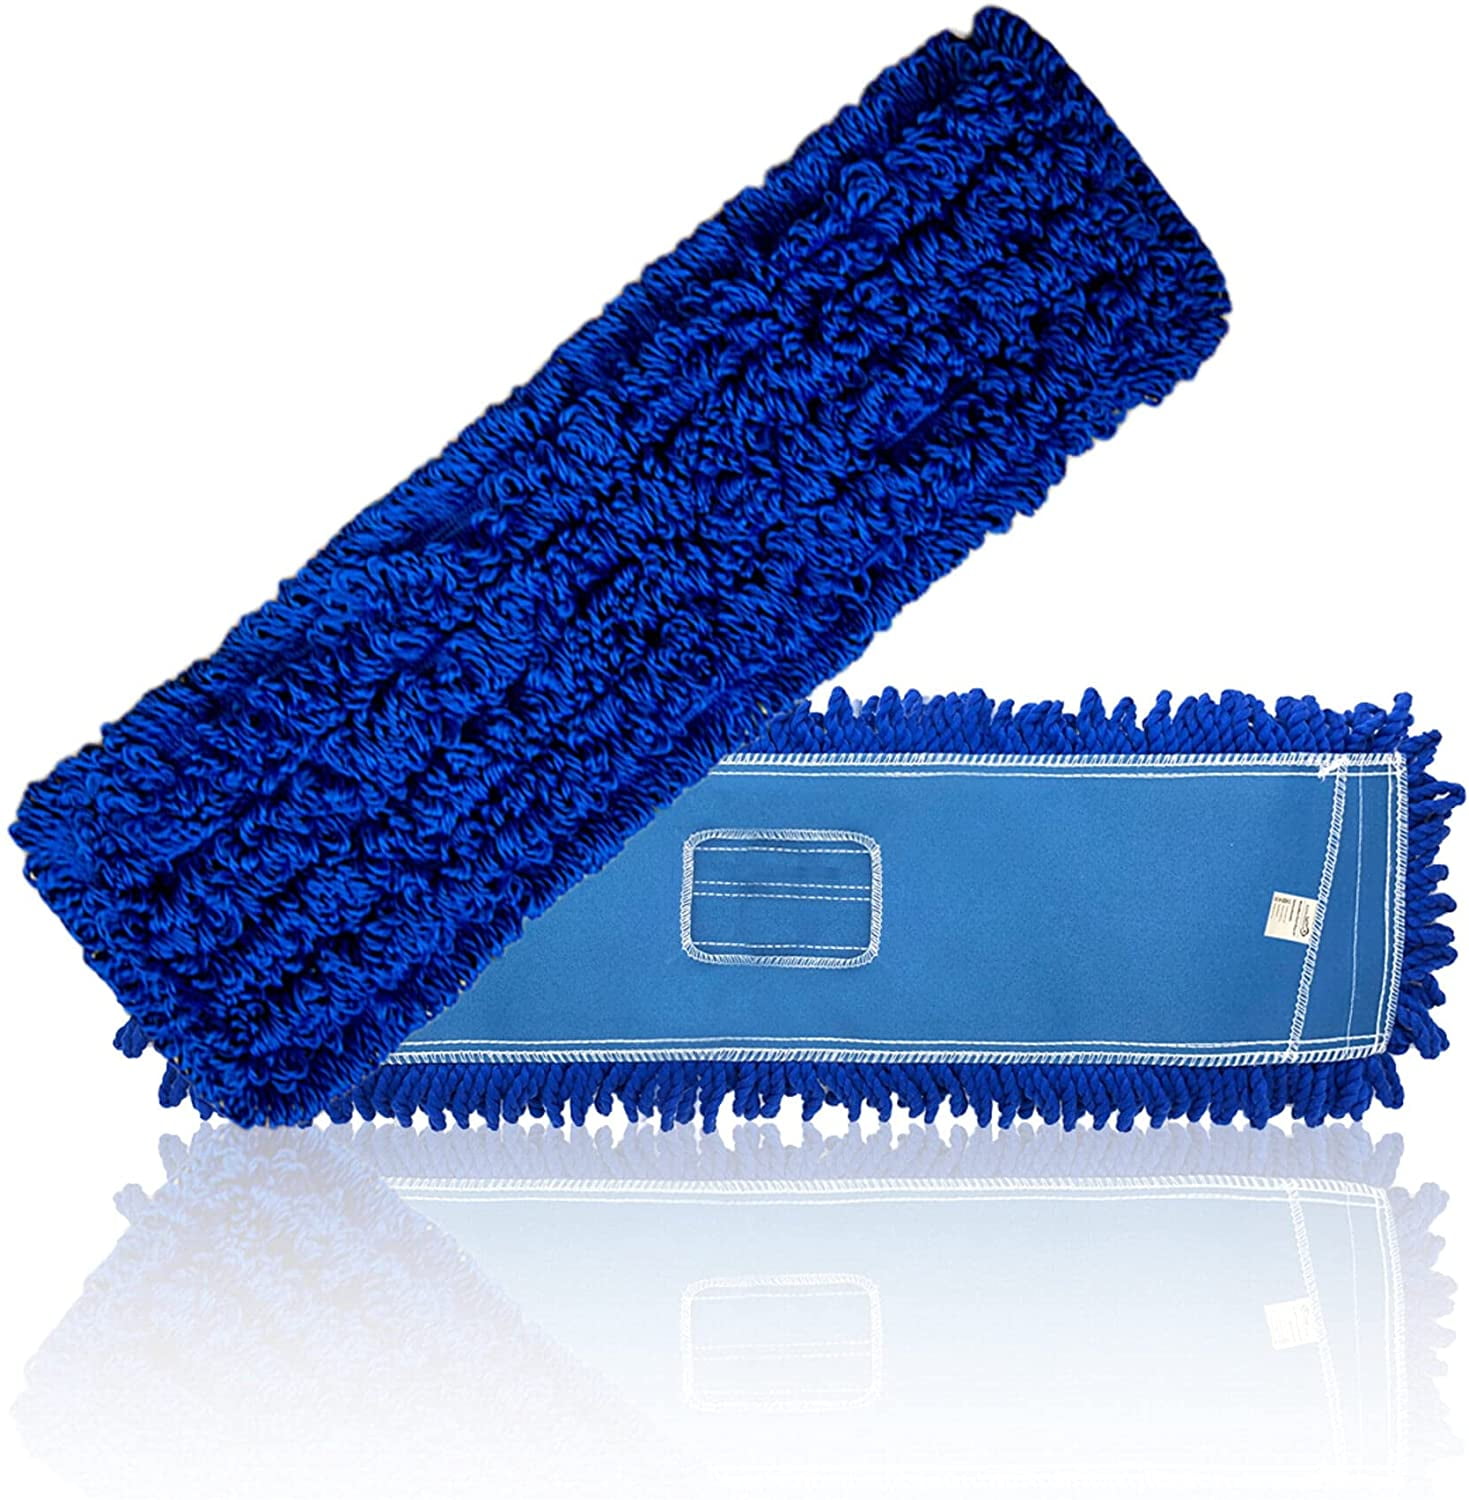 TOTALPACK® Economy 24 Dry Dust Mop Replacement Head 1 Unit